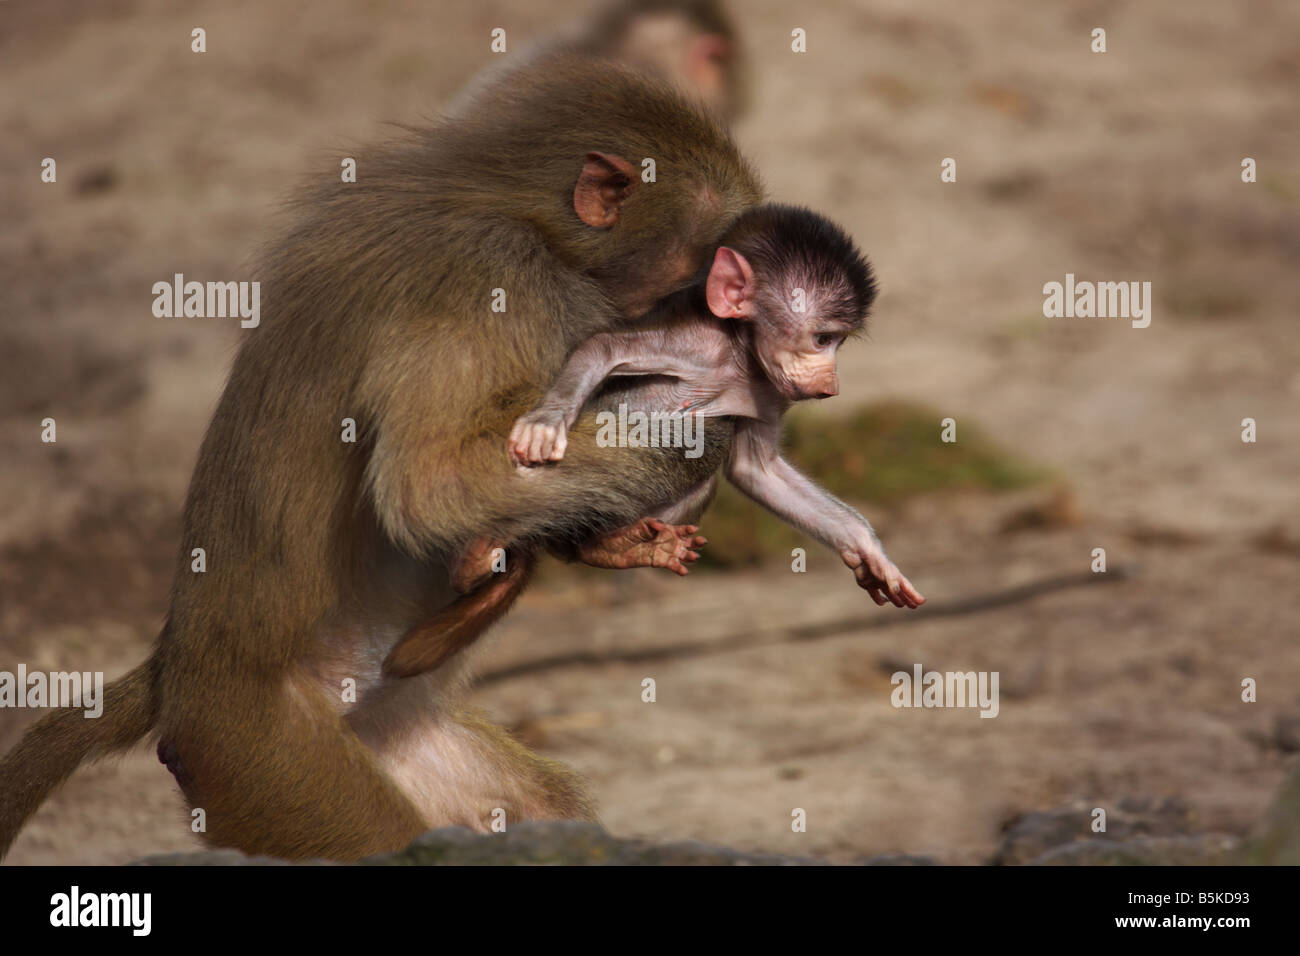 Baboon running with a Baby in her arms Stock Photo